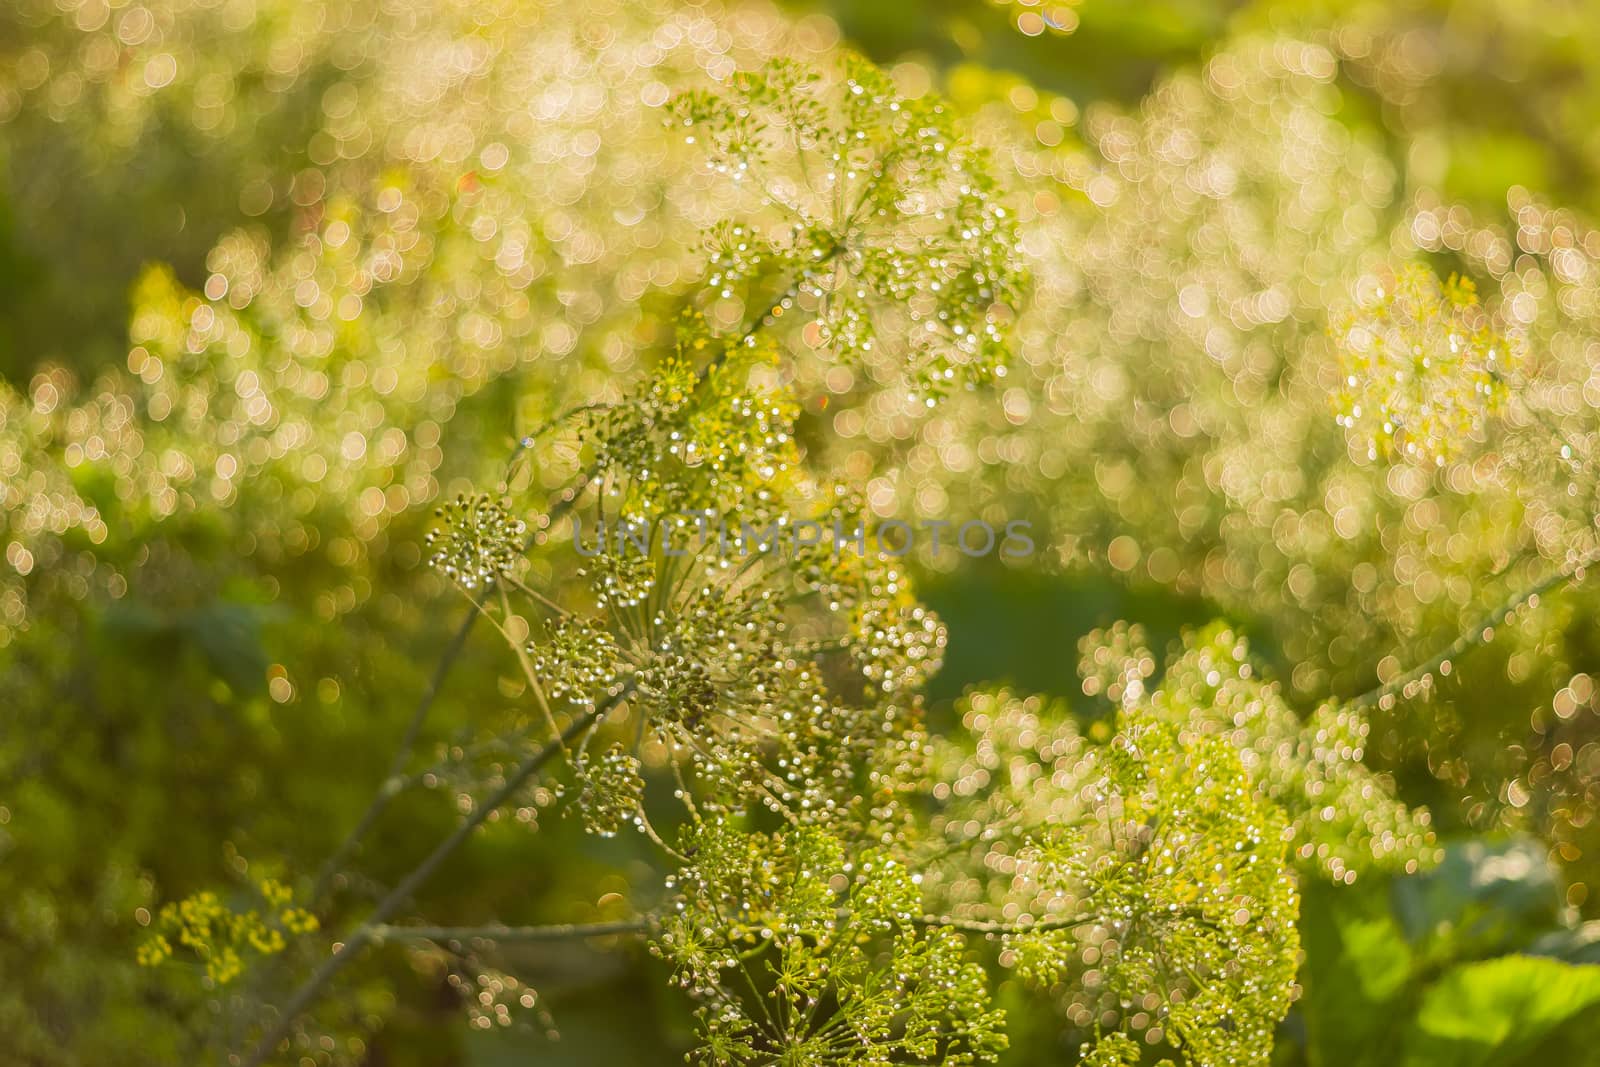 Background of the flowering dill with umbel inflorescences and droplets of dew closeup at shallow depth of field
